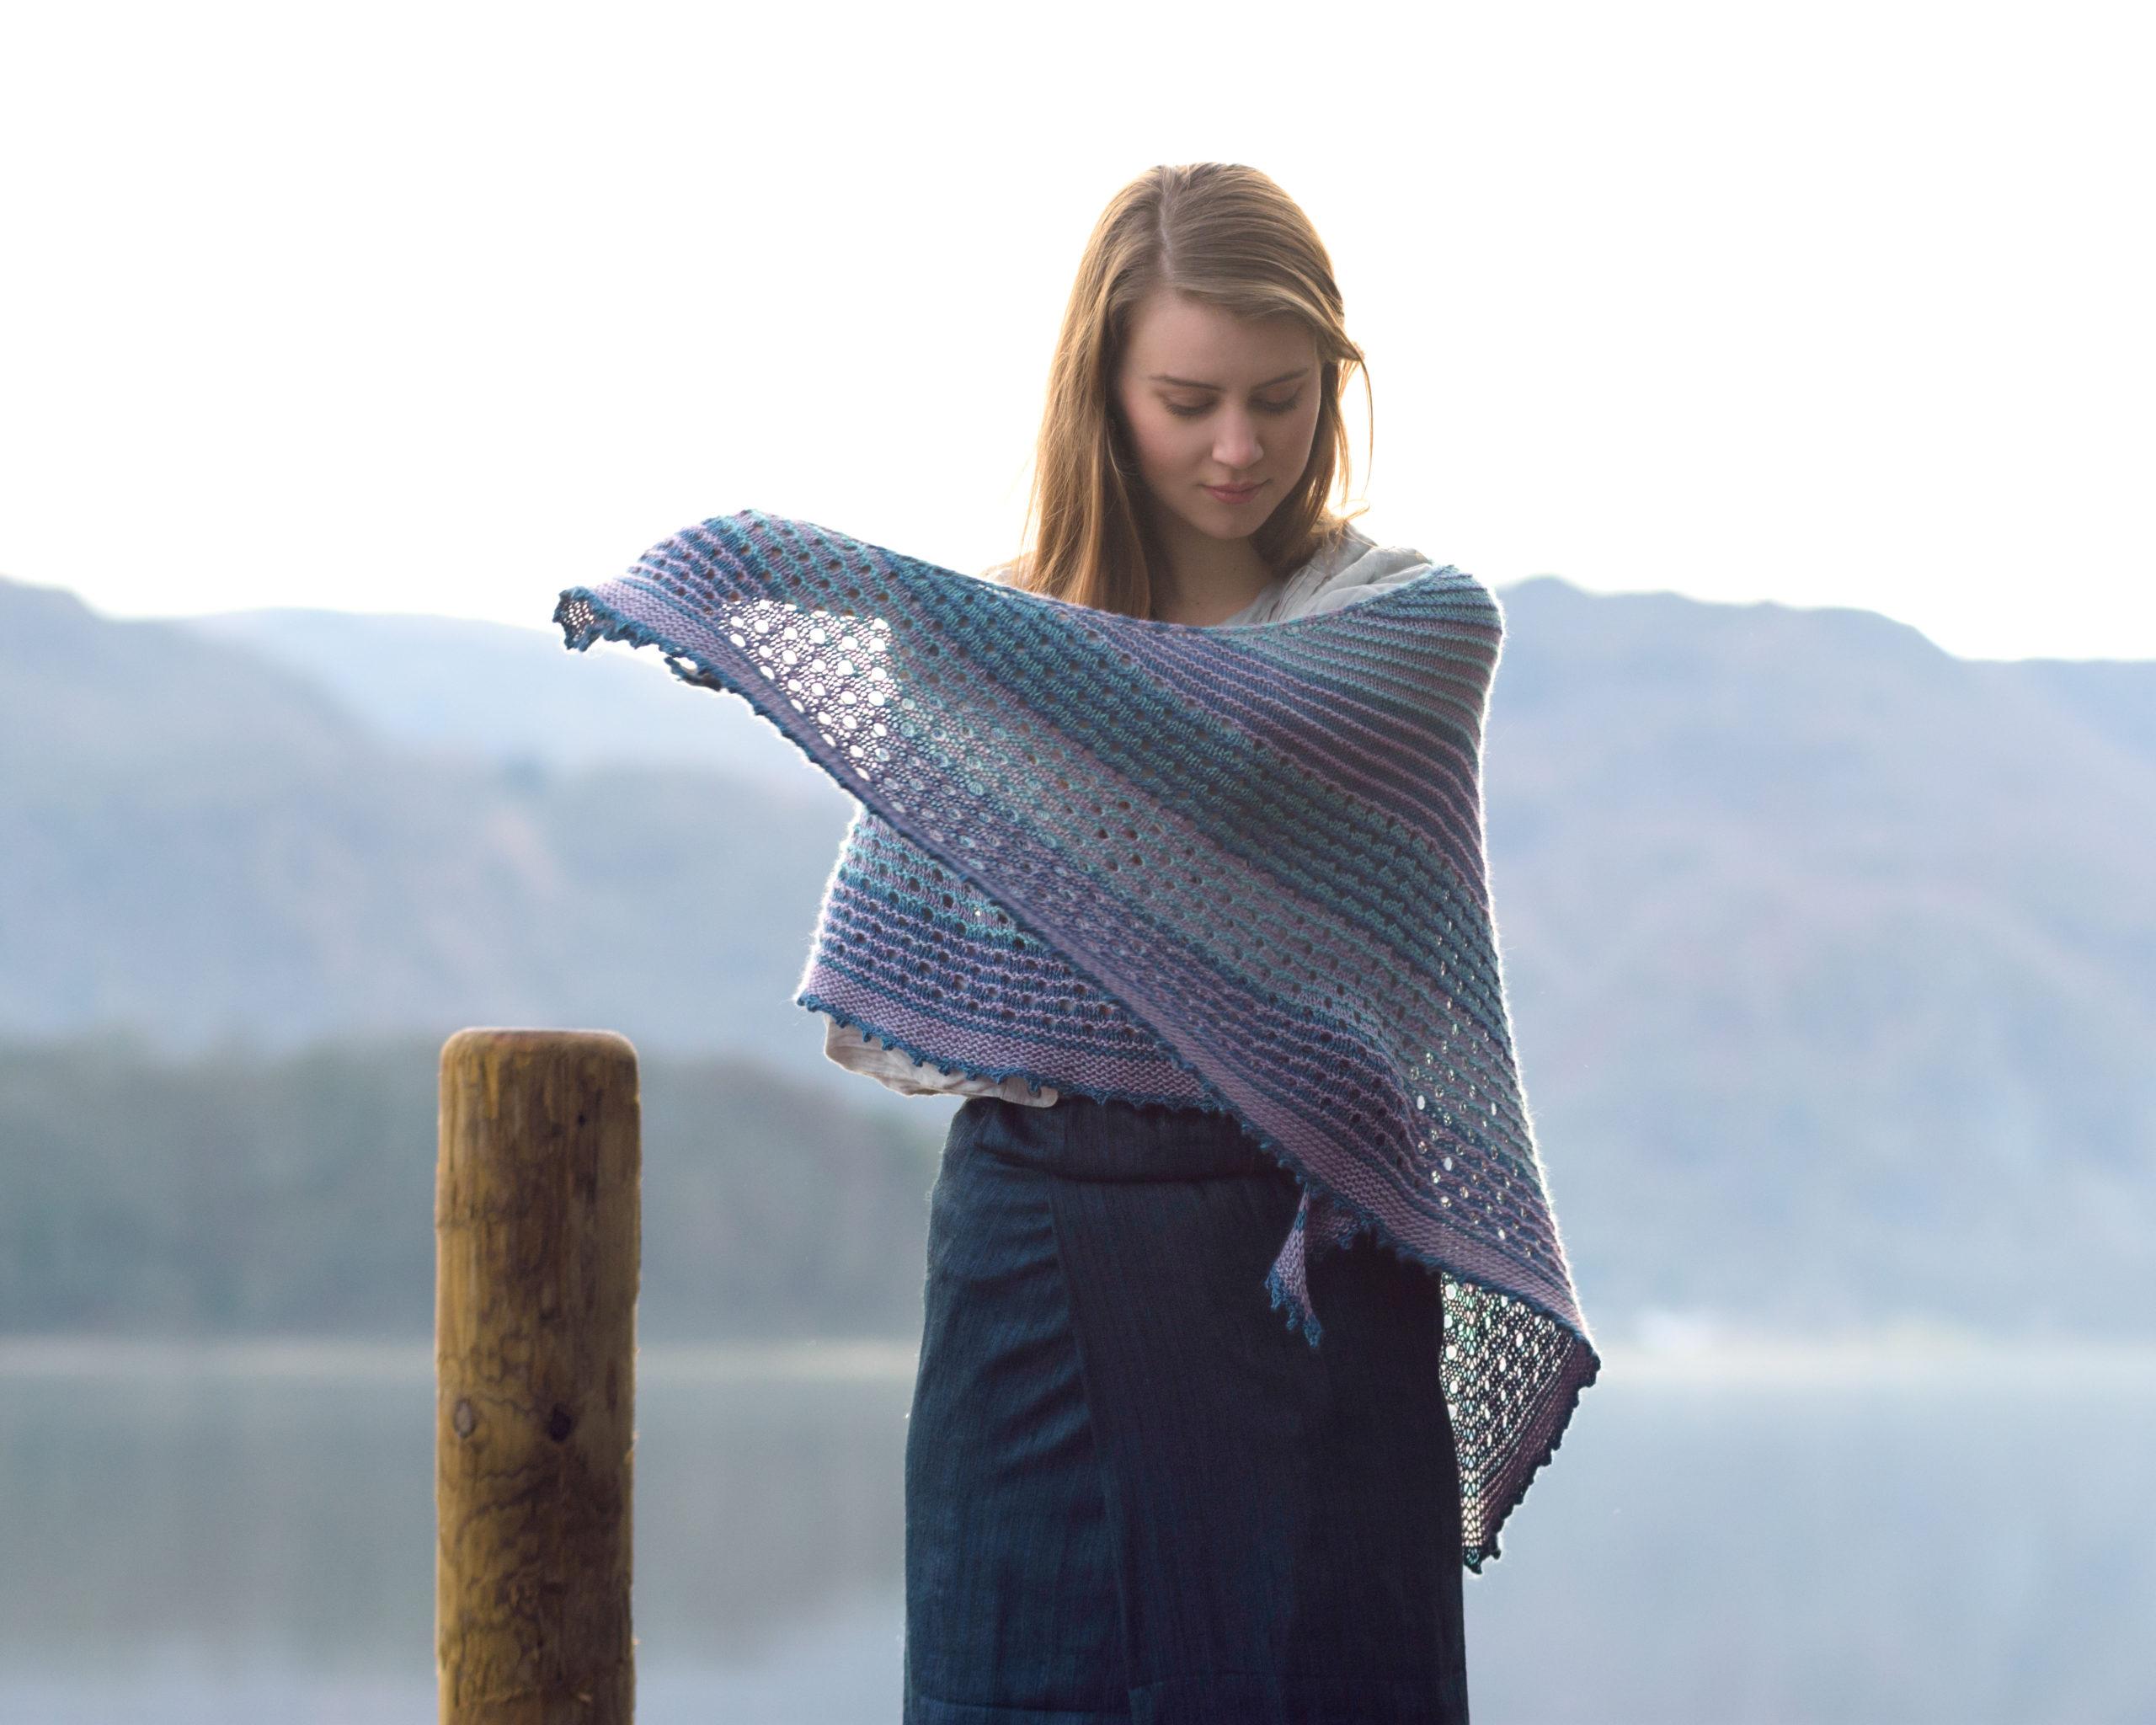 Kelso Shawl, designed by Helen Stewart of Curious Handmade